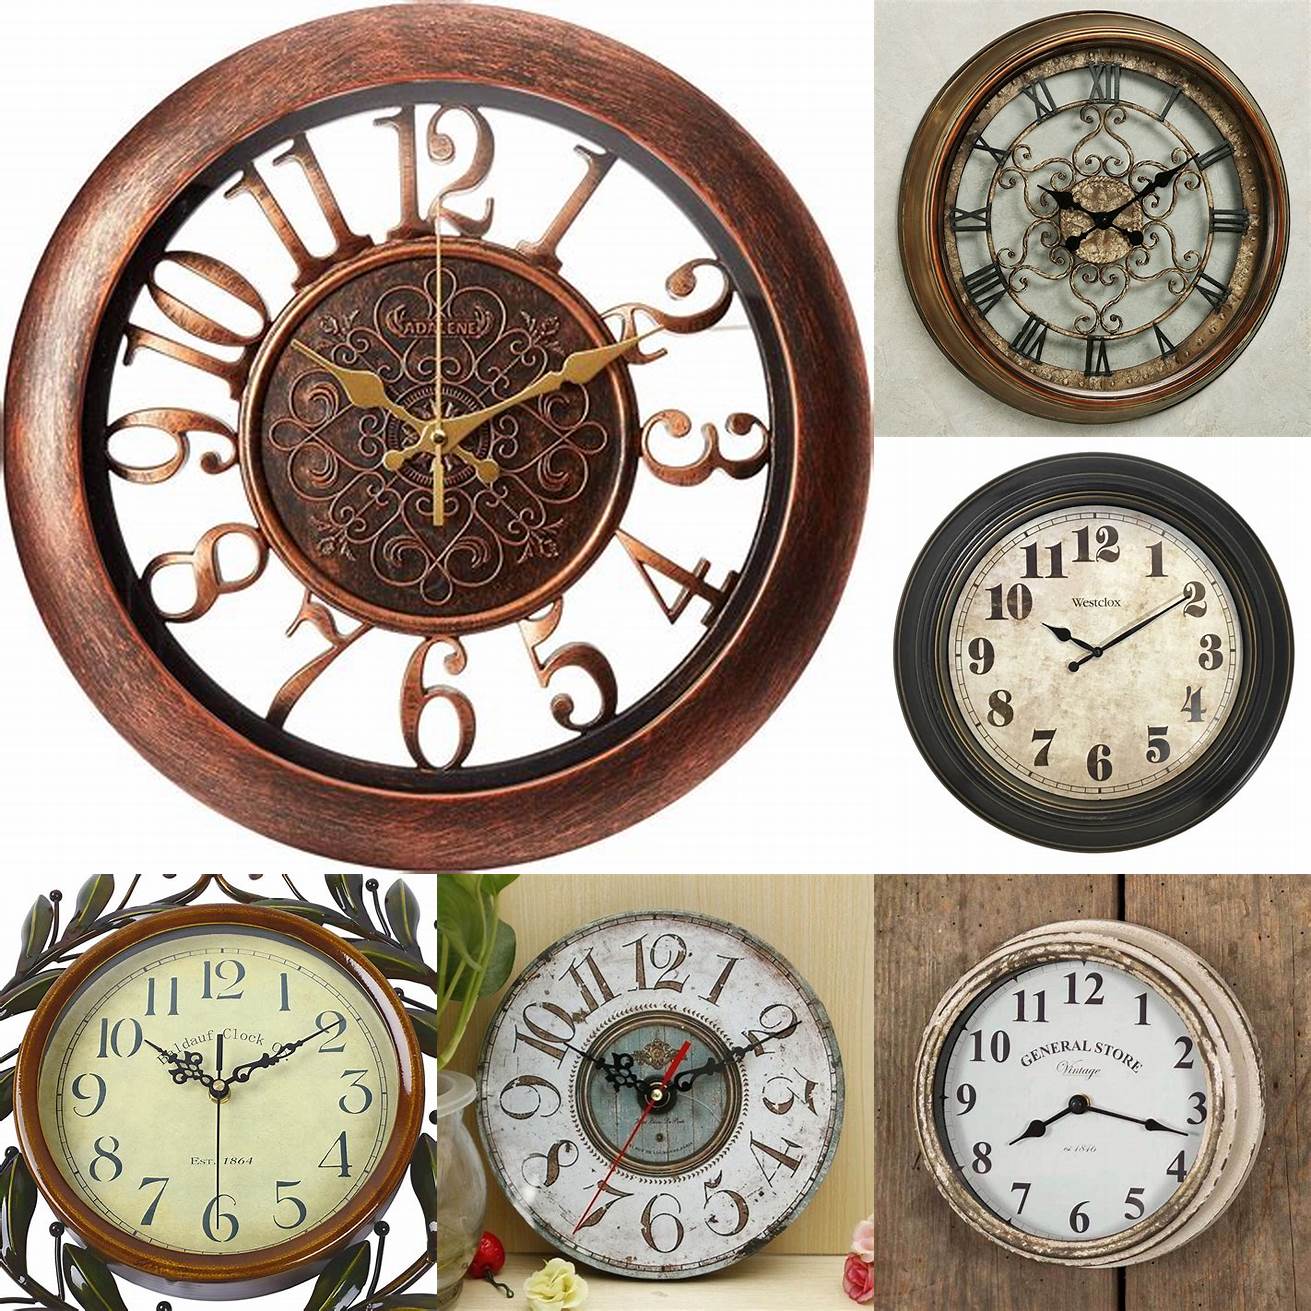 4 Vintage-Inspired Wall Clock